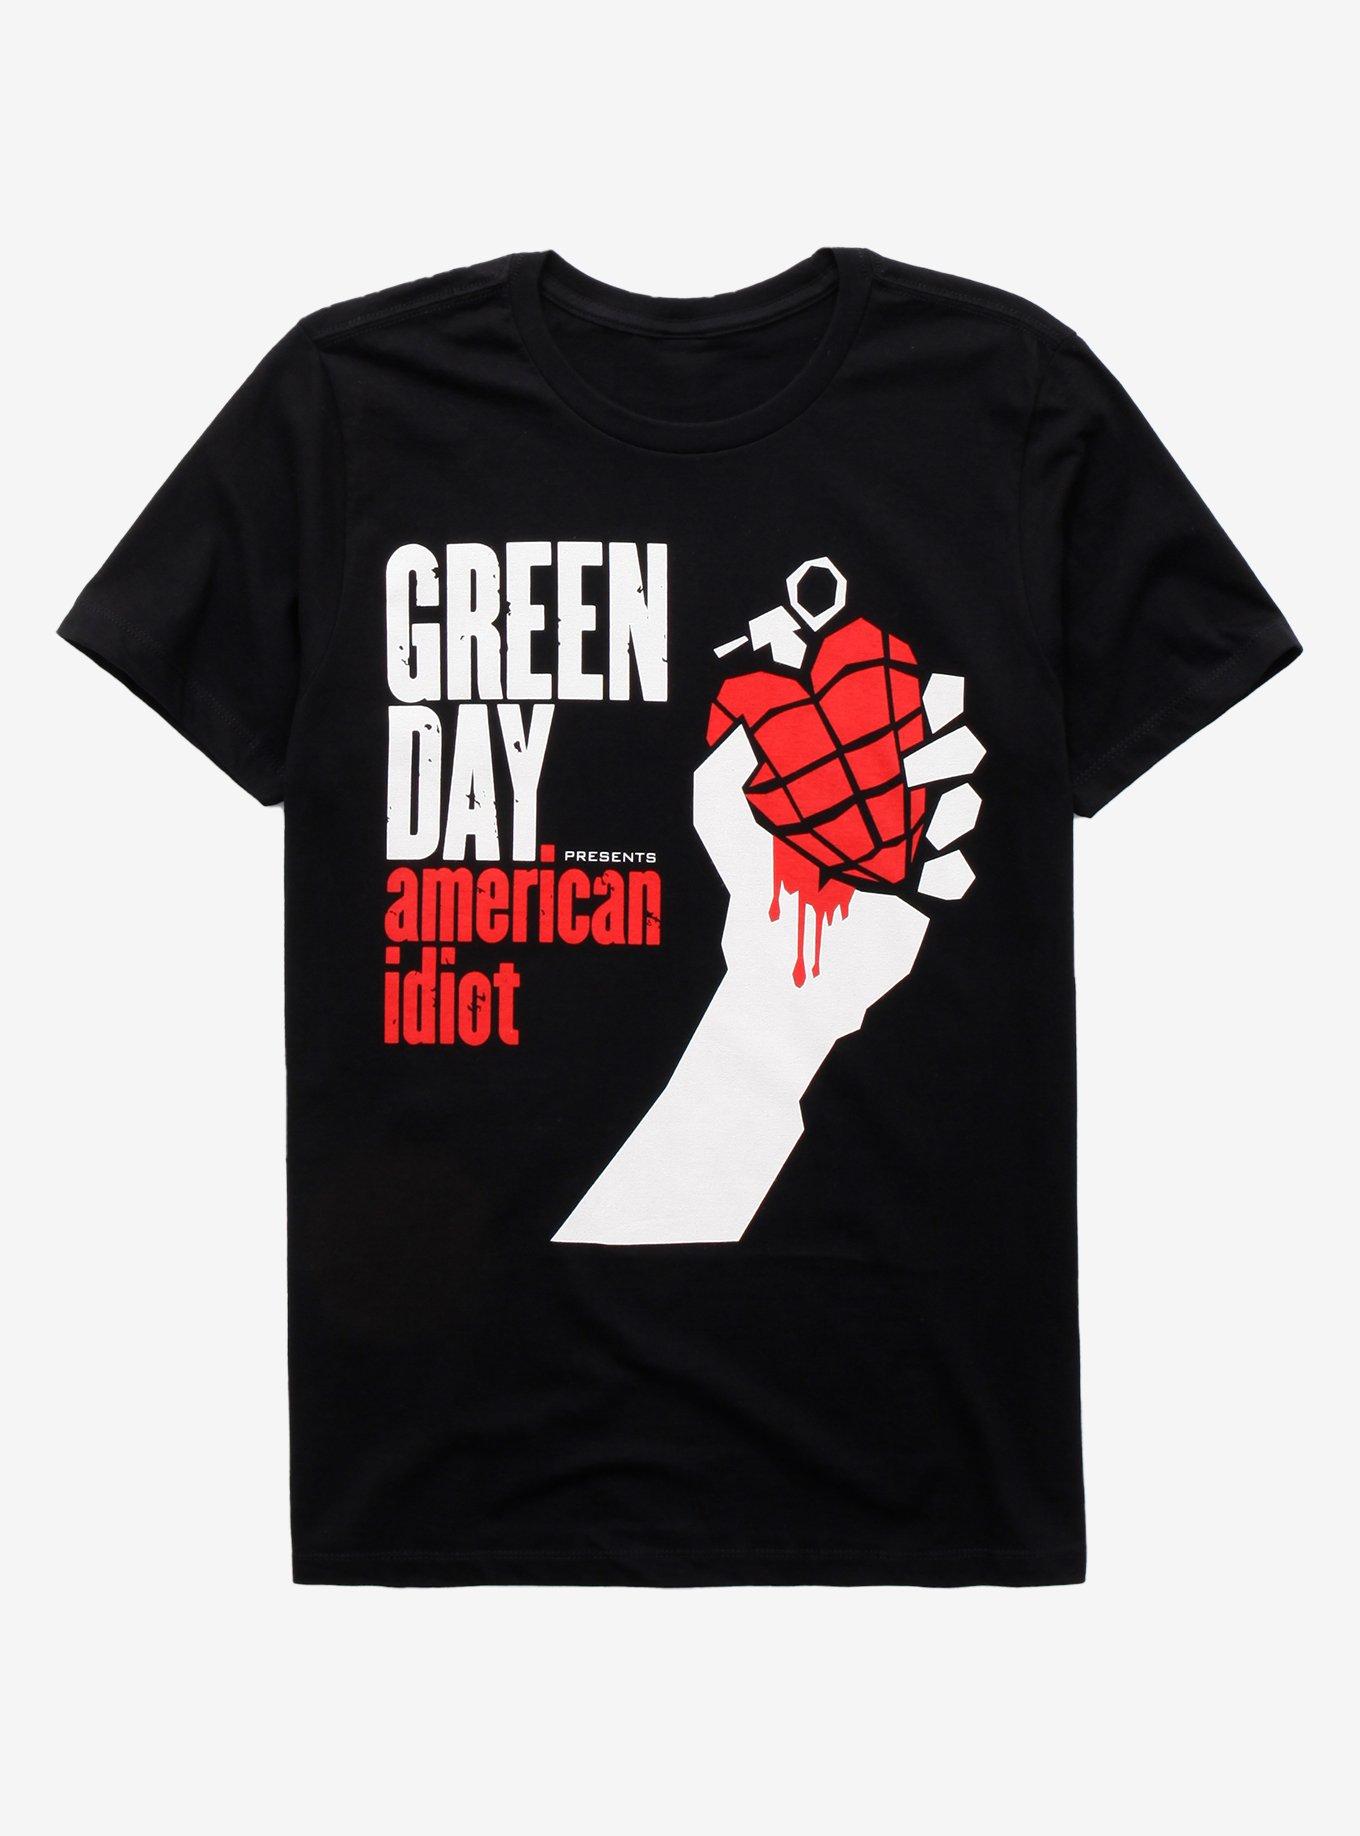 Official Green Day Apparel Clothing Merch Store Green Day Kerplunk Pullover Hoodie  GreenDay Shop - Wiotee